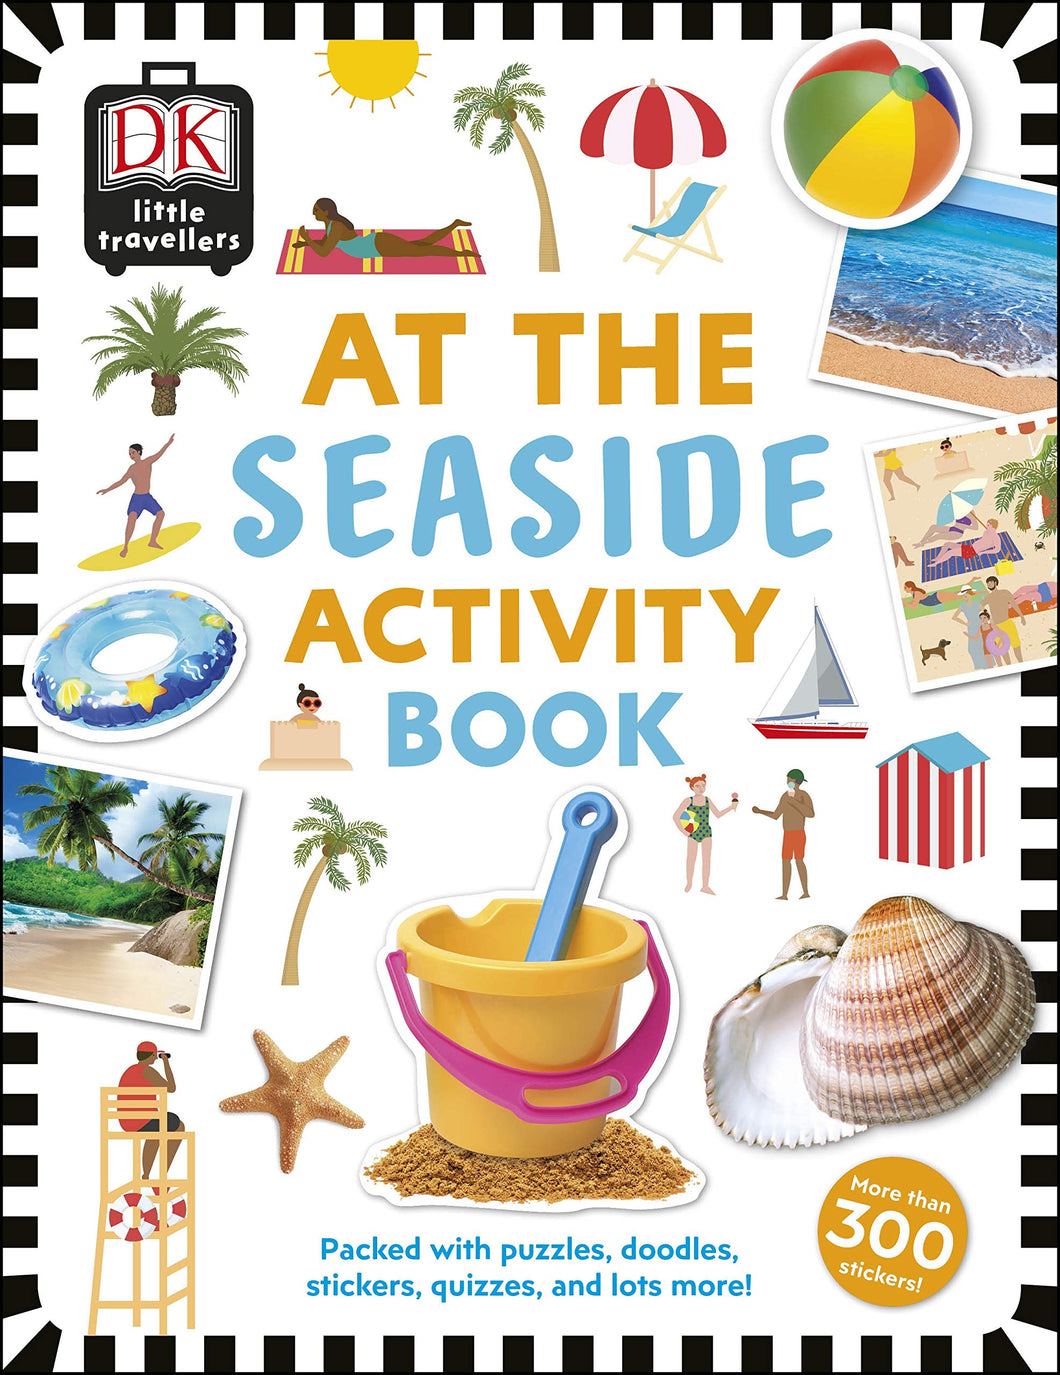 At the Seaside Activity Book: Includes more than 300 Stickers